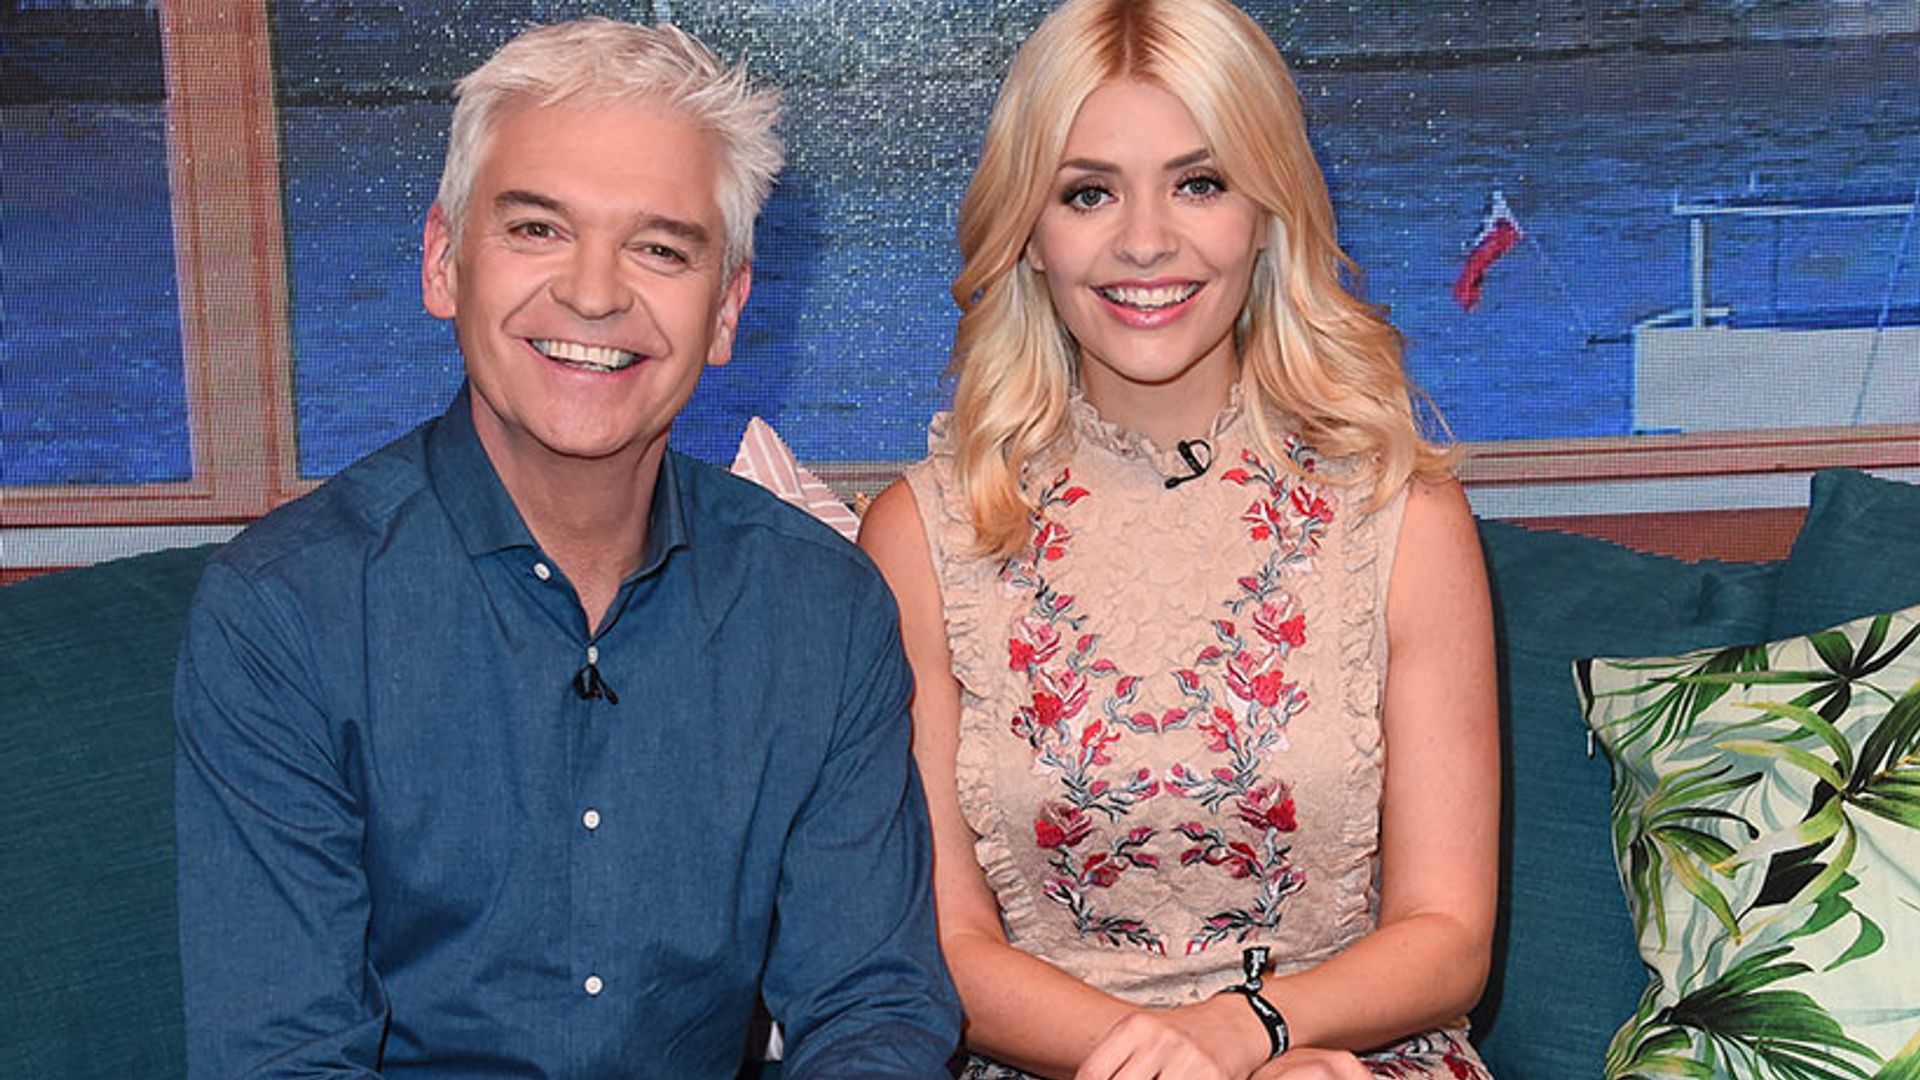 Holly Willoughby calls out 'naughty' Phillip Schofield for teasing her about eating cake 'all the time'